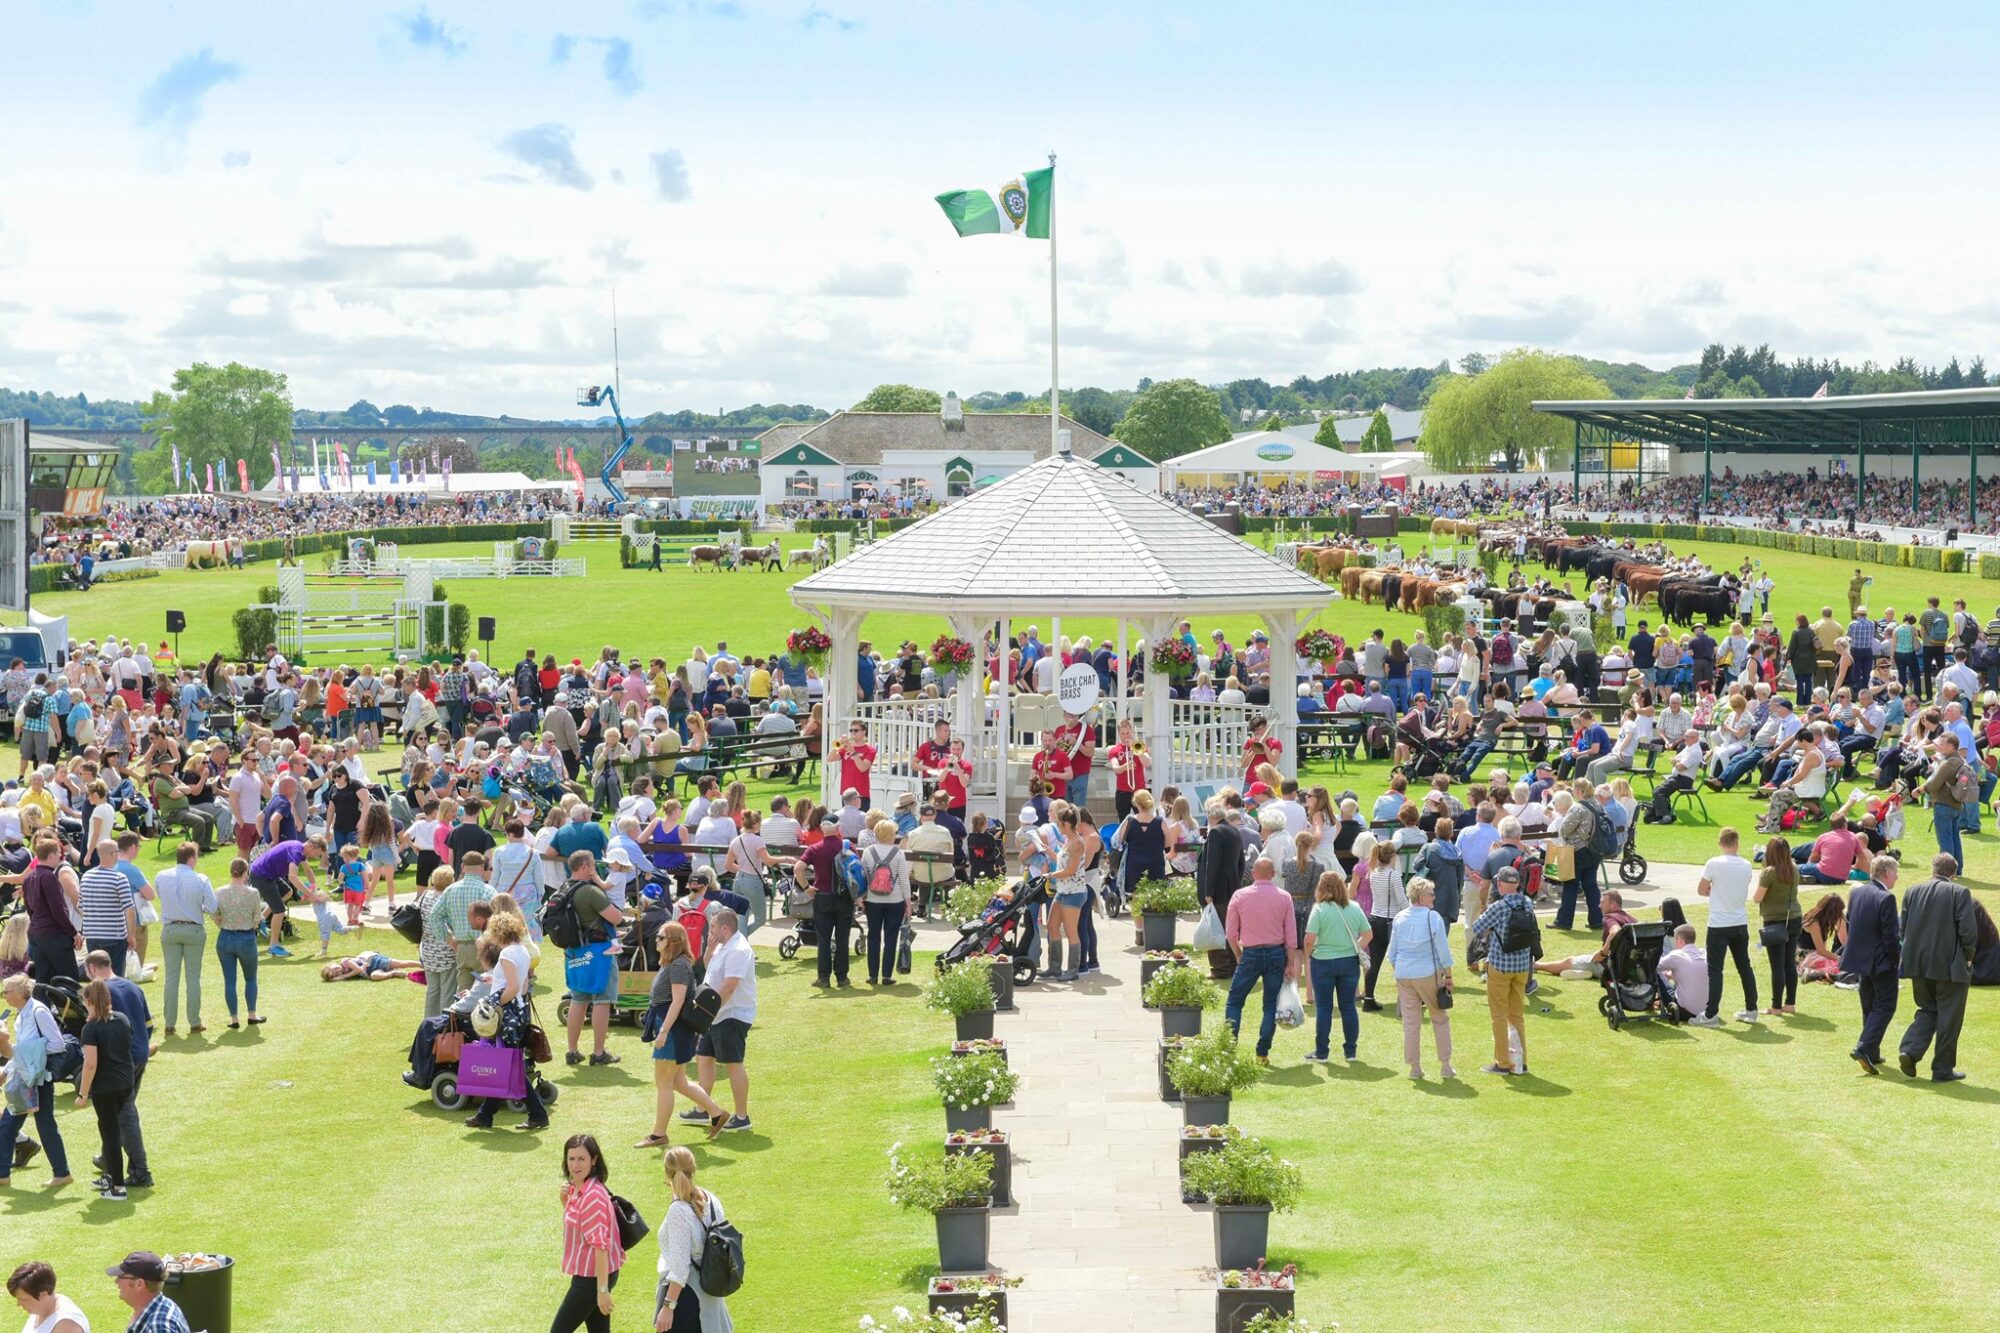 Image name great yorkshire show main ring the 2 image from the post Celebrity farmers attending 2022 Great Yorkshire Show announced in Yorkshire.com.